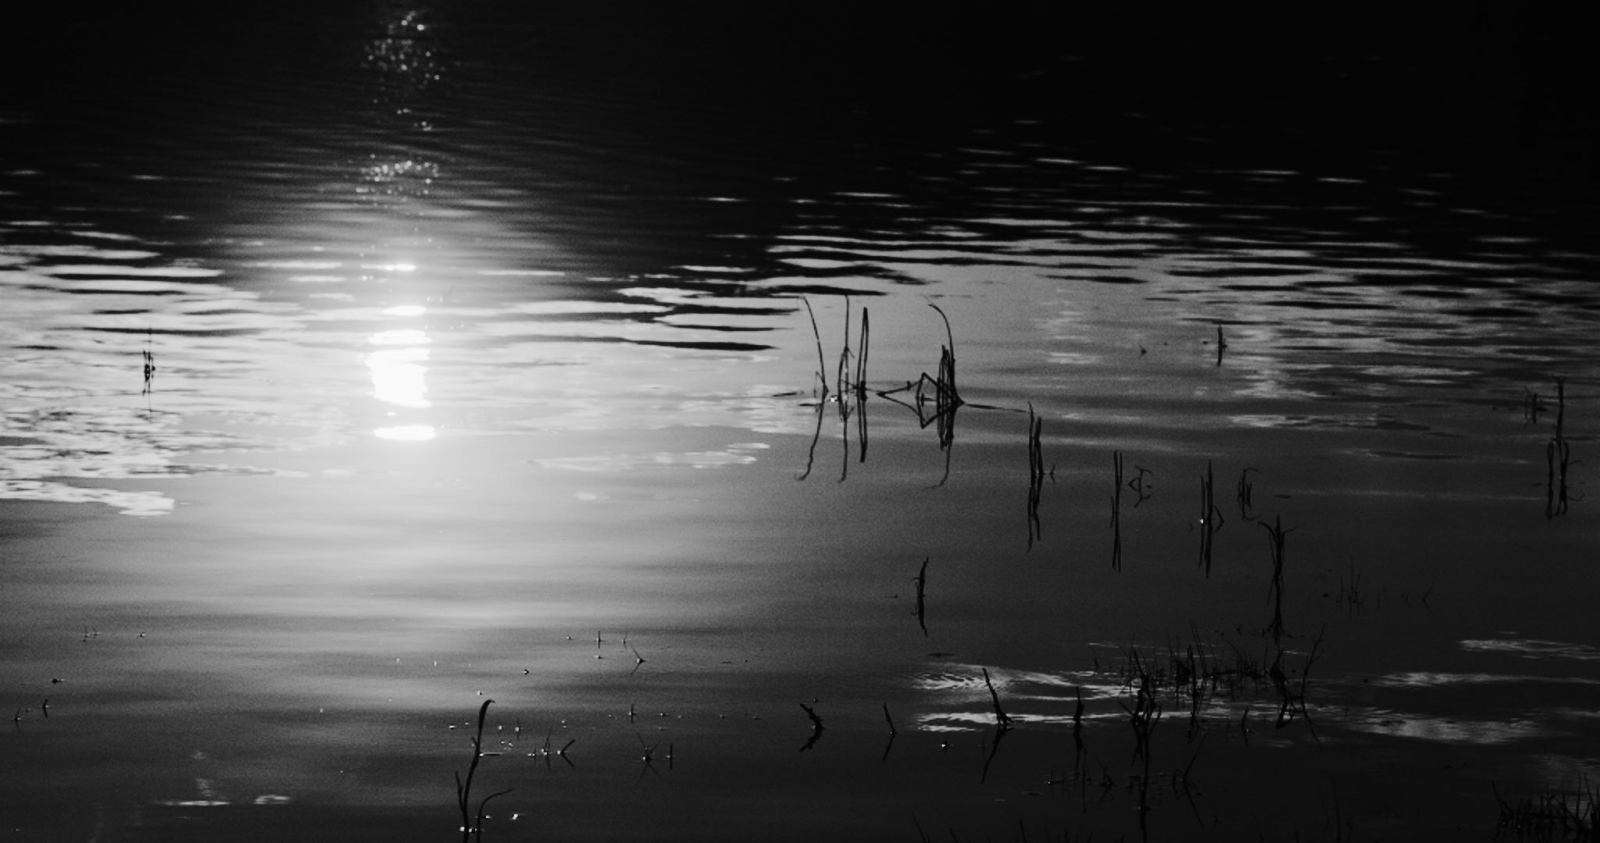 The Changing Climate - Reeds  Reeds in the shallows of a lake near Bozeman Montana.